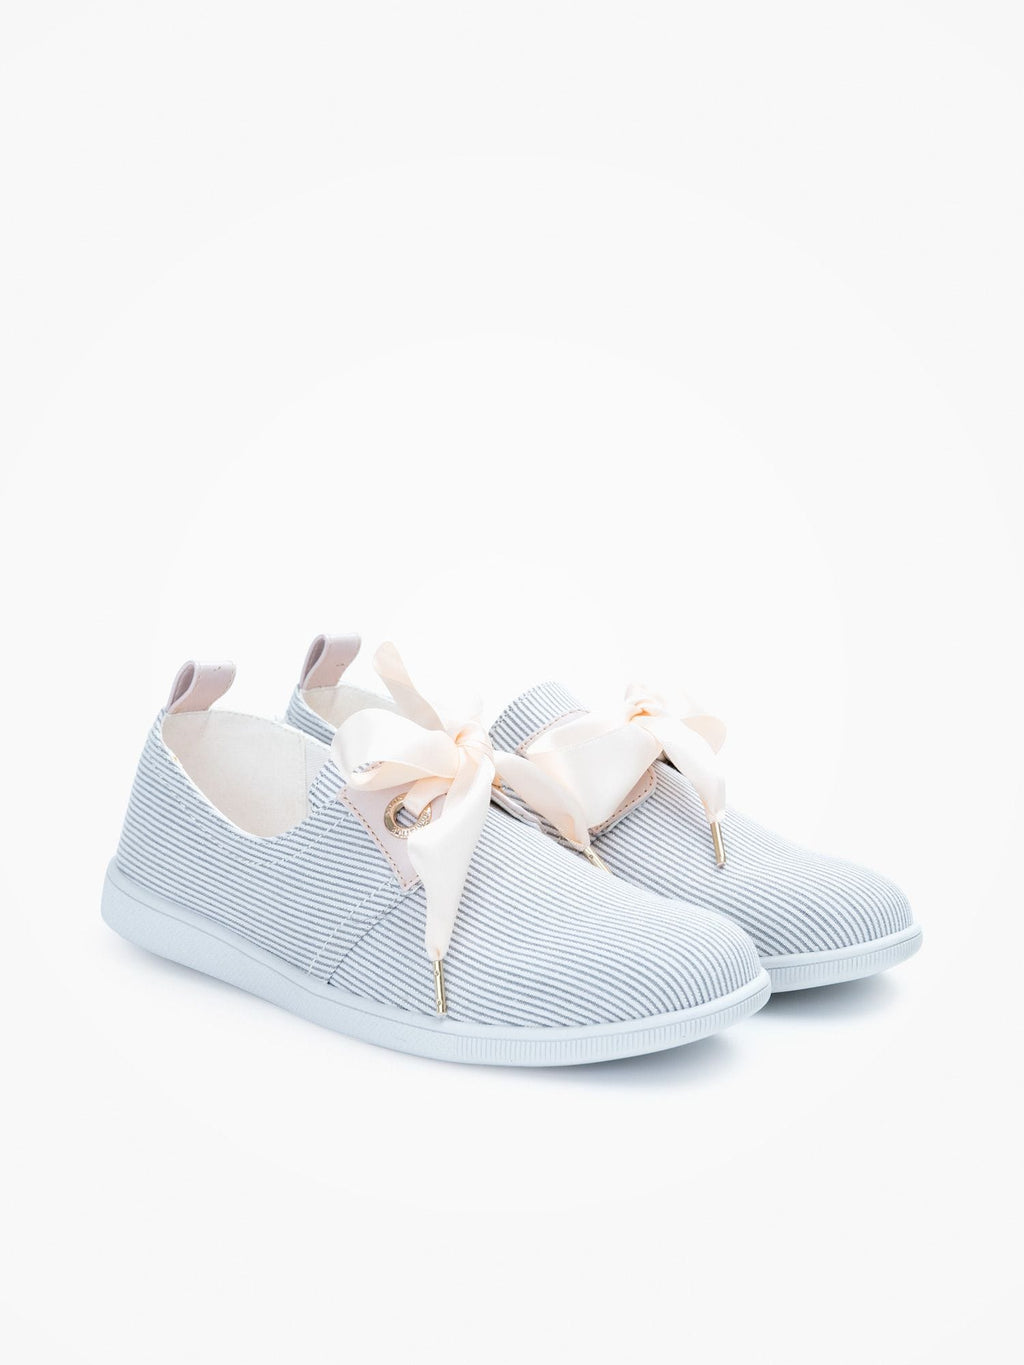 This French ‘Marina’ neo retro sneaker comes packed with elegant details such as cream silk ribbon shoelaces which complement beautifully its nautical inspiration with oversized eyelets and leather yokes.  